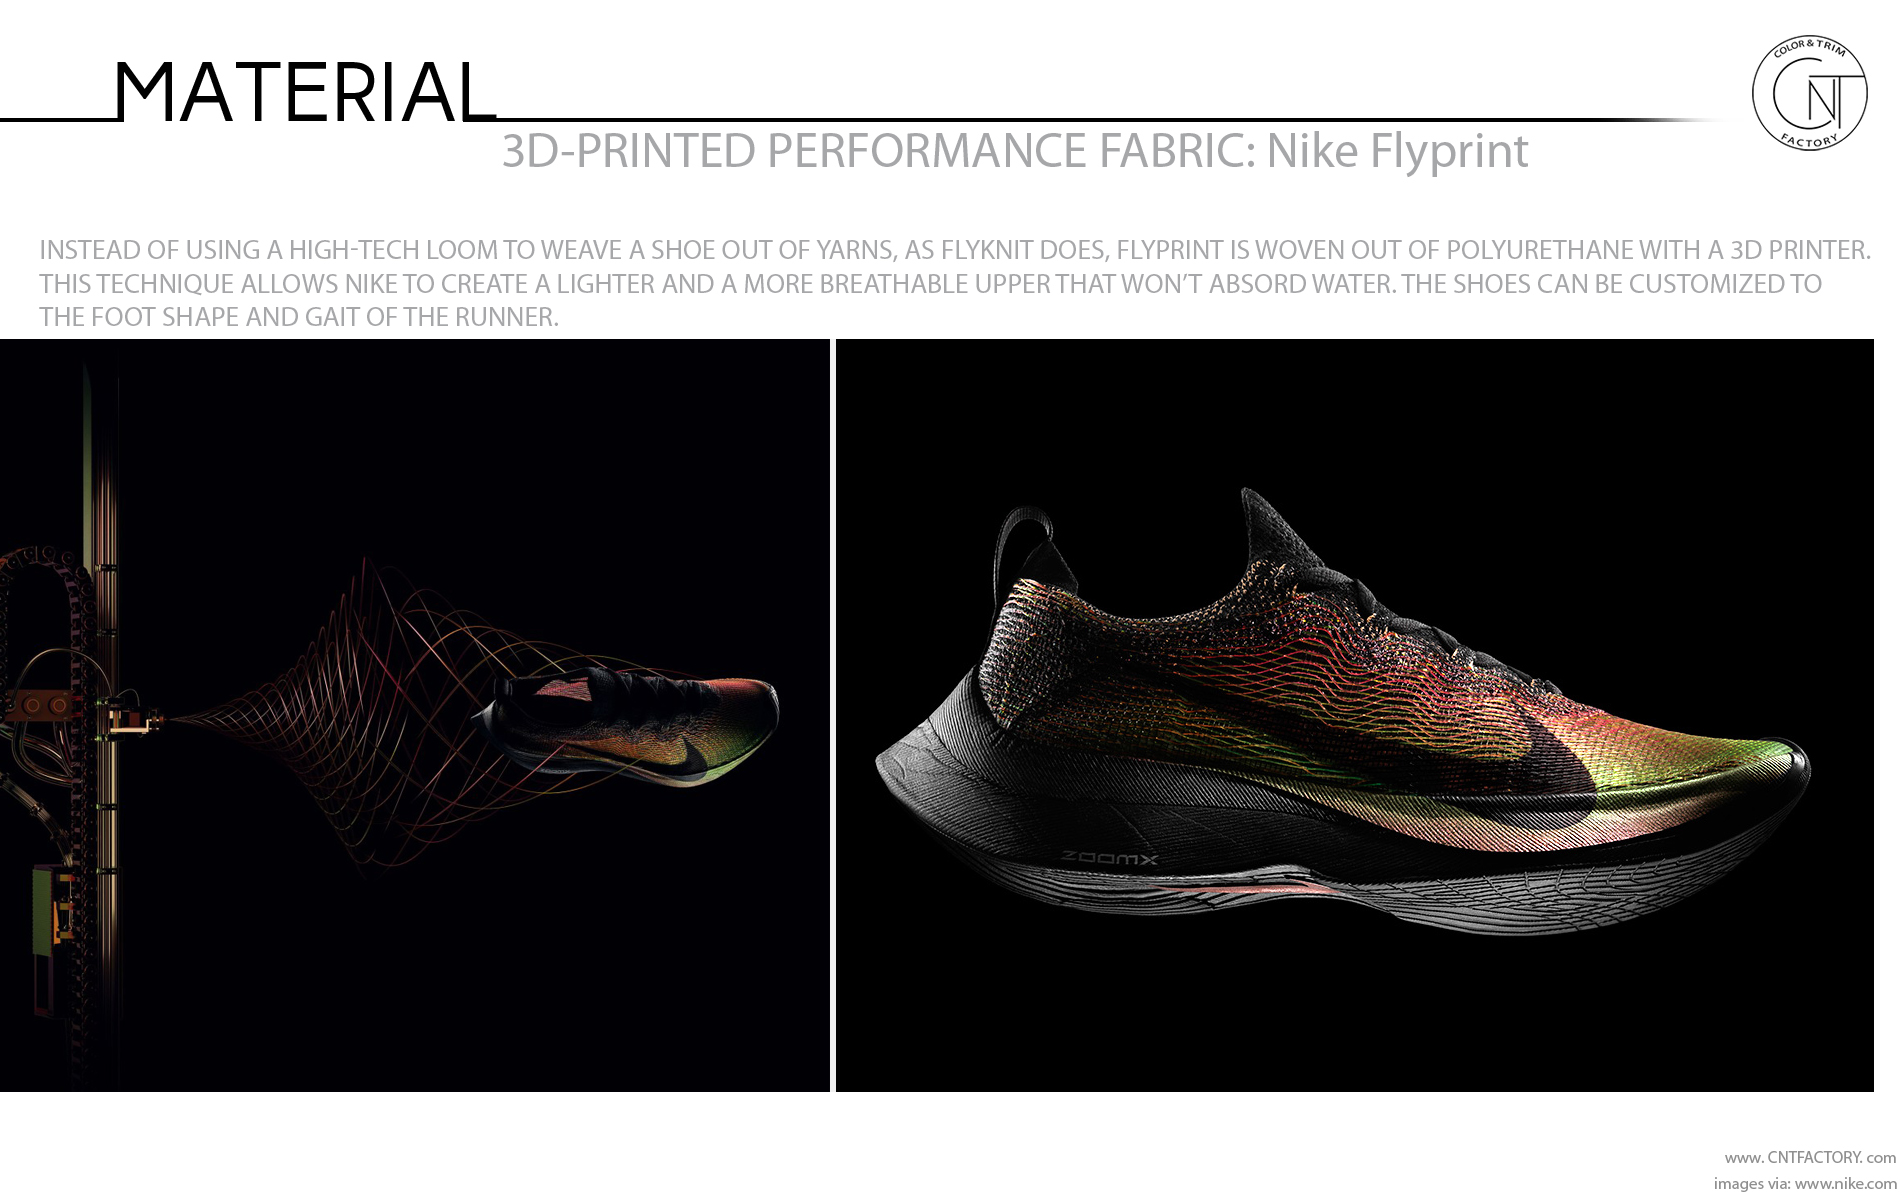 Inferior sentido Glamour Nike Flyprint 3D Printed Textile Upper Automotive ColorTrim Trends